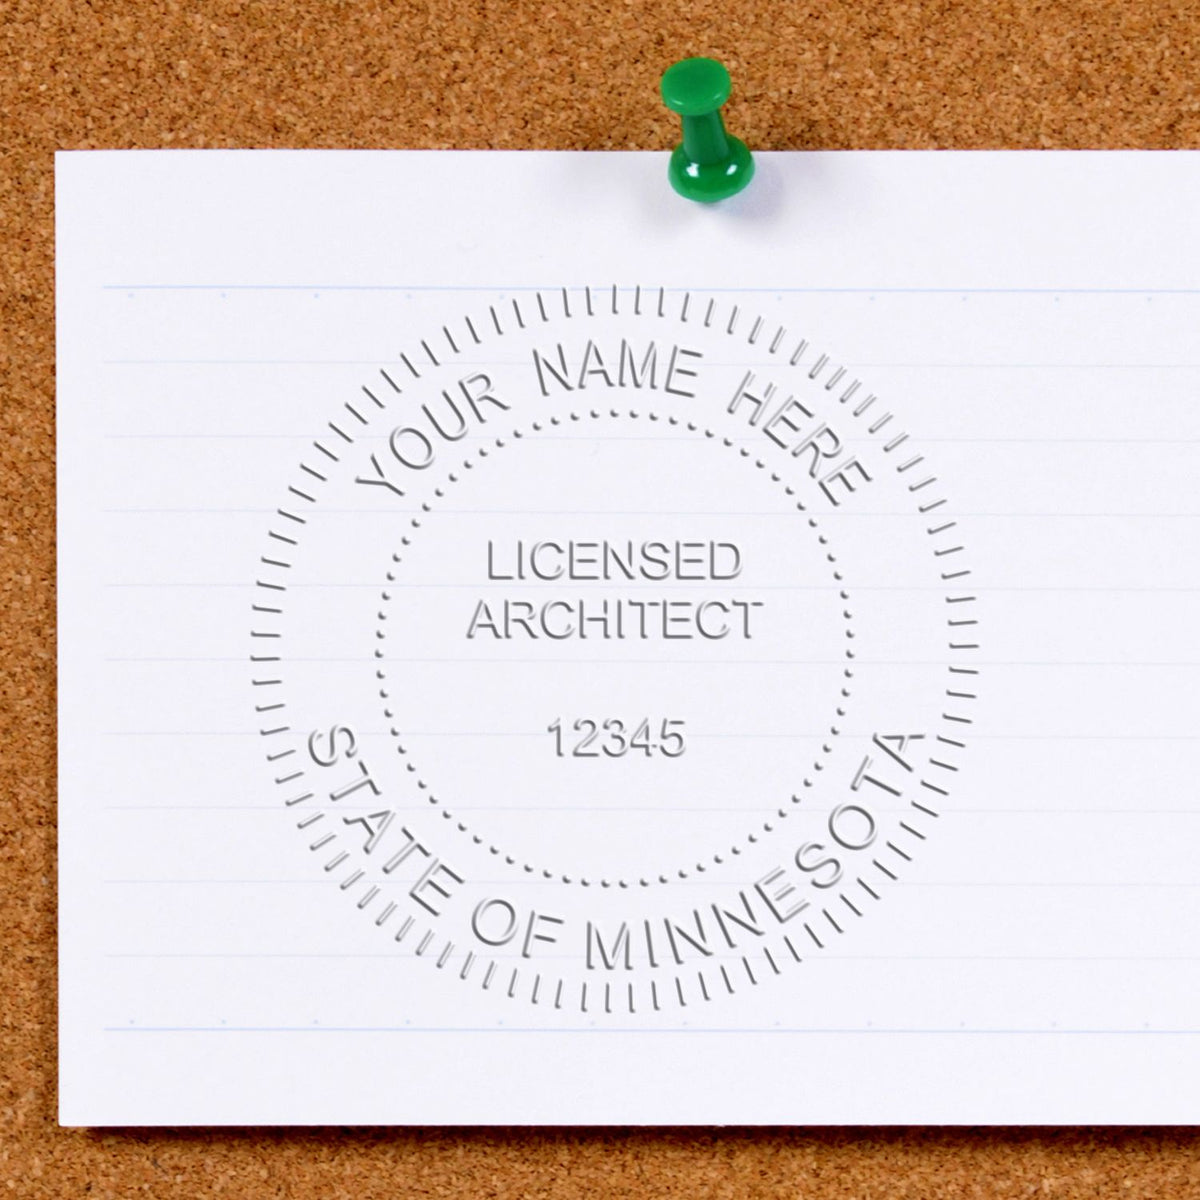 The Minnesota Desk Architect Embossing Seal stamp impression comes to life with a crisp, detailed photo on paper - showcasing true professional quality.